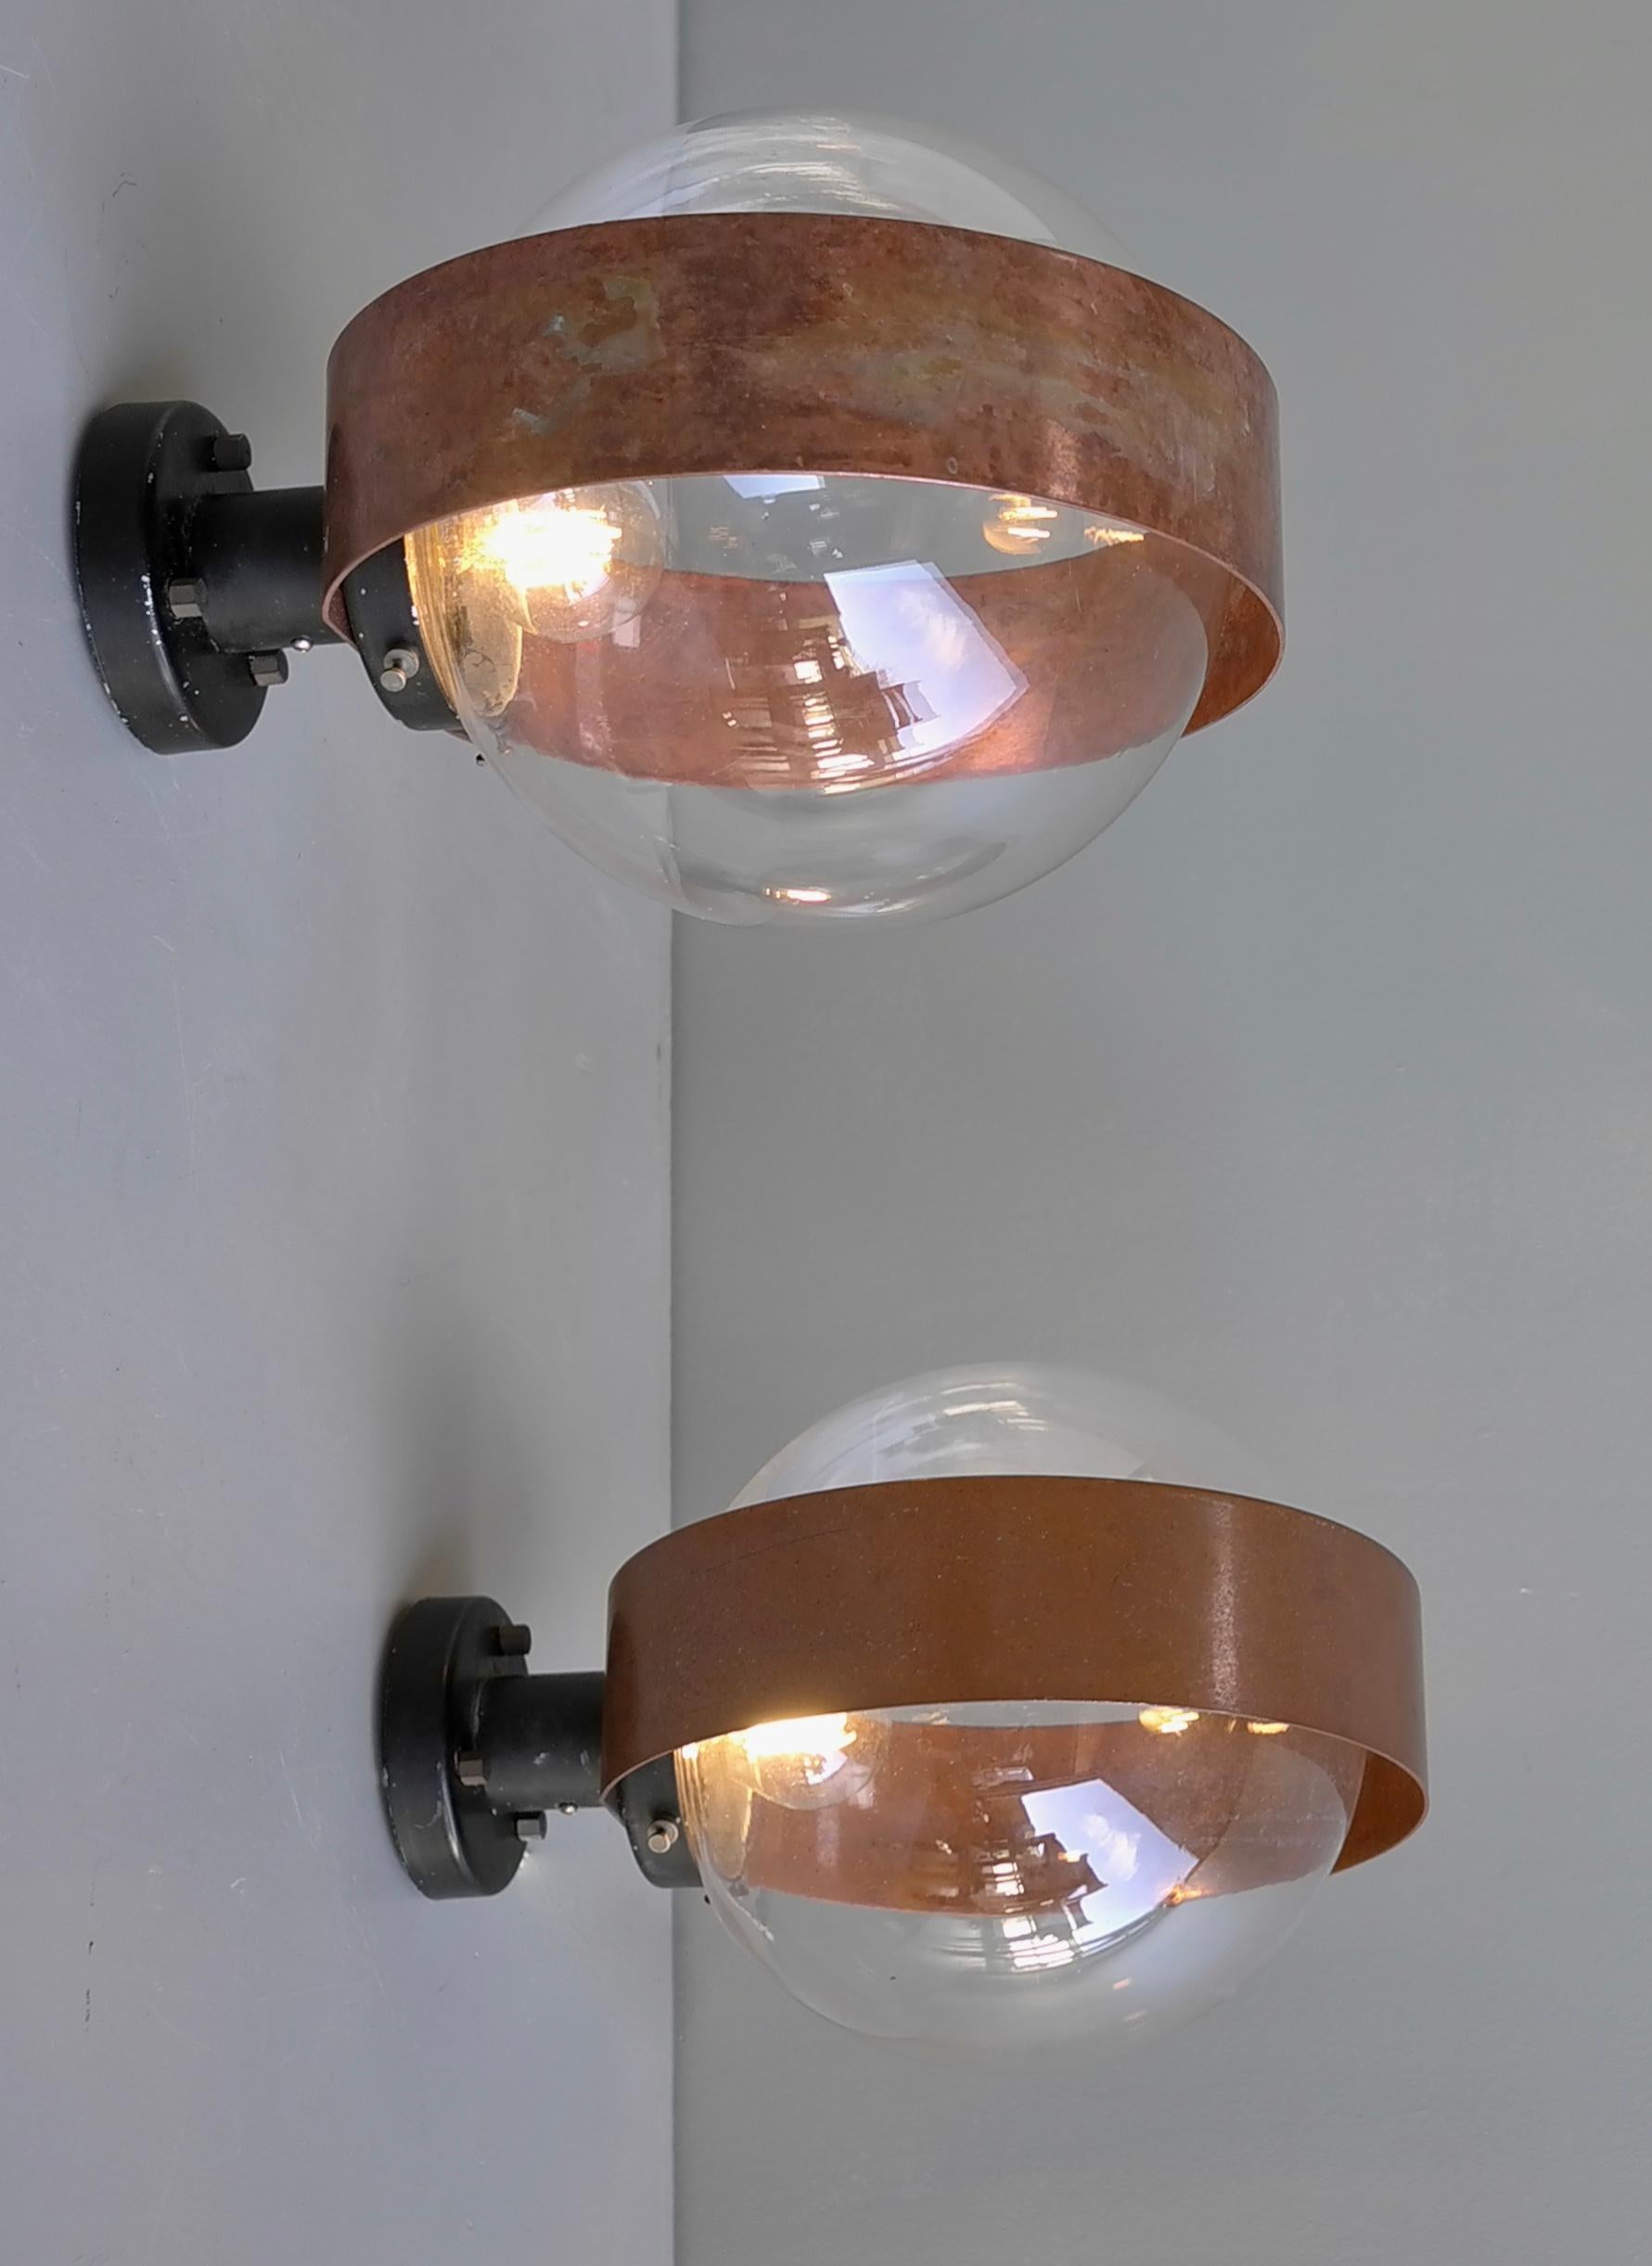 Pair of Scandinavian Glass Ball Wall lamps with Copper Patina Rims, 1960's For Sale 11